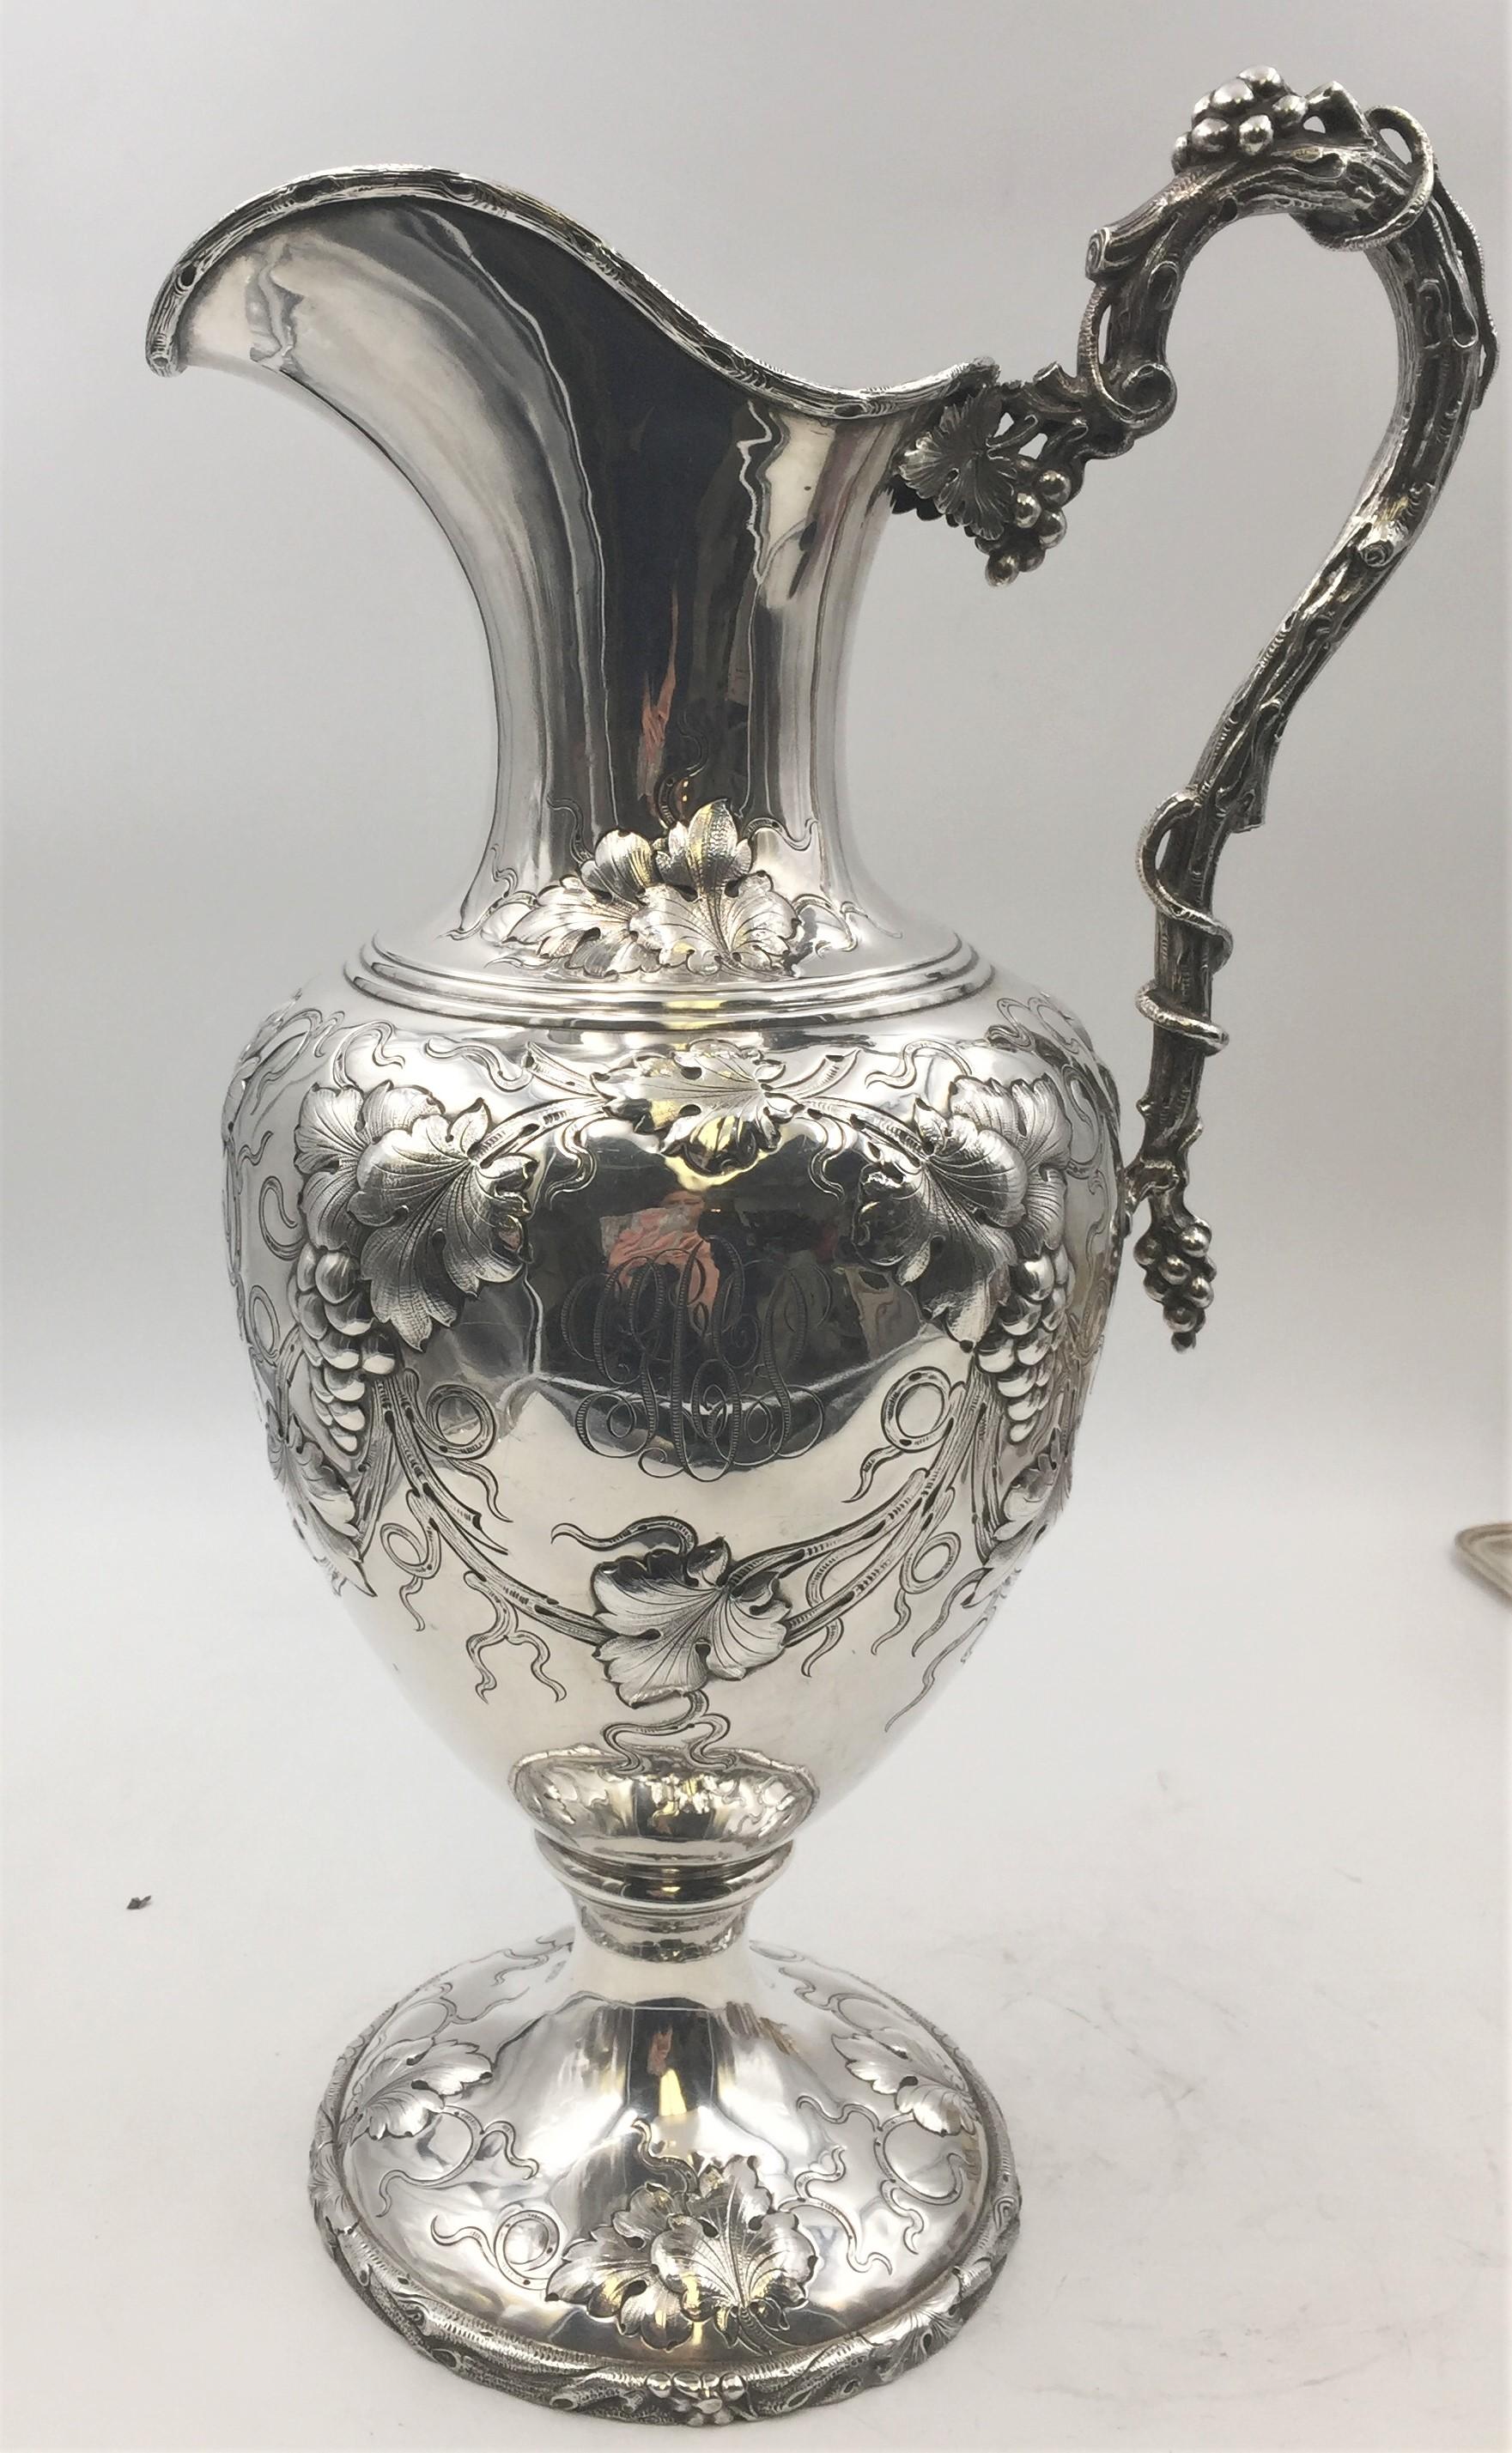 One of a kind and extraordinary sterling silver ewer, monumental in size by Galt Brothers, circa 1910. Body of the ewer designed in high shoulder baluster form, decorated with grape clusters , leaves, and vines in beautiful relief. Handle designed